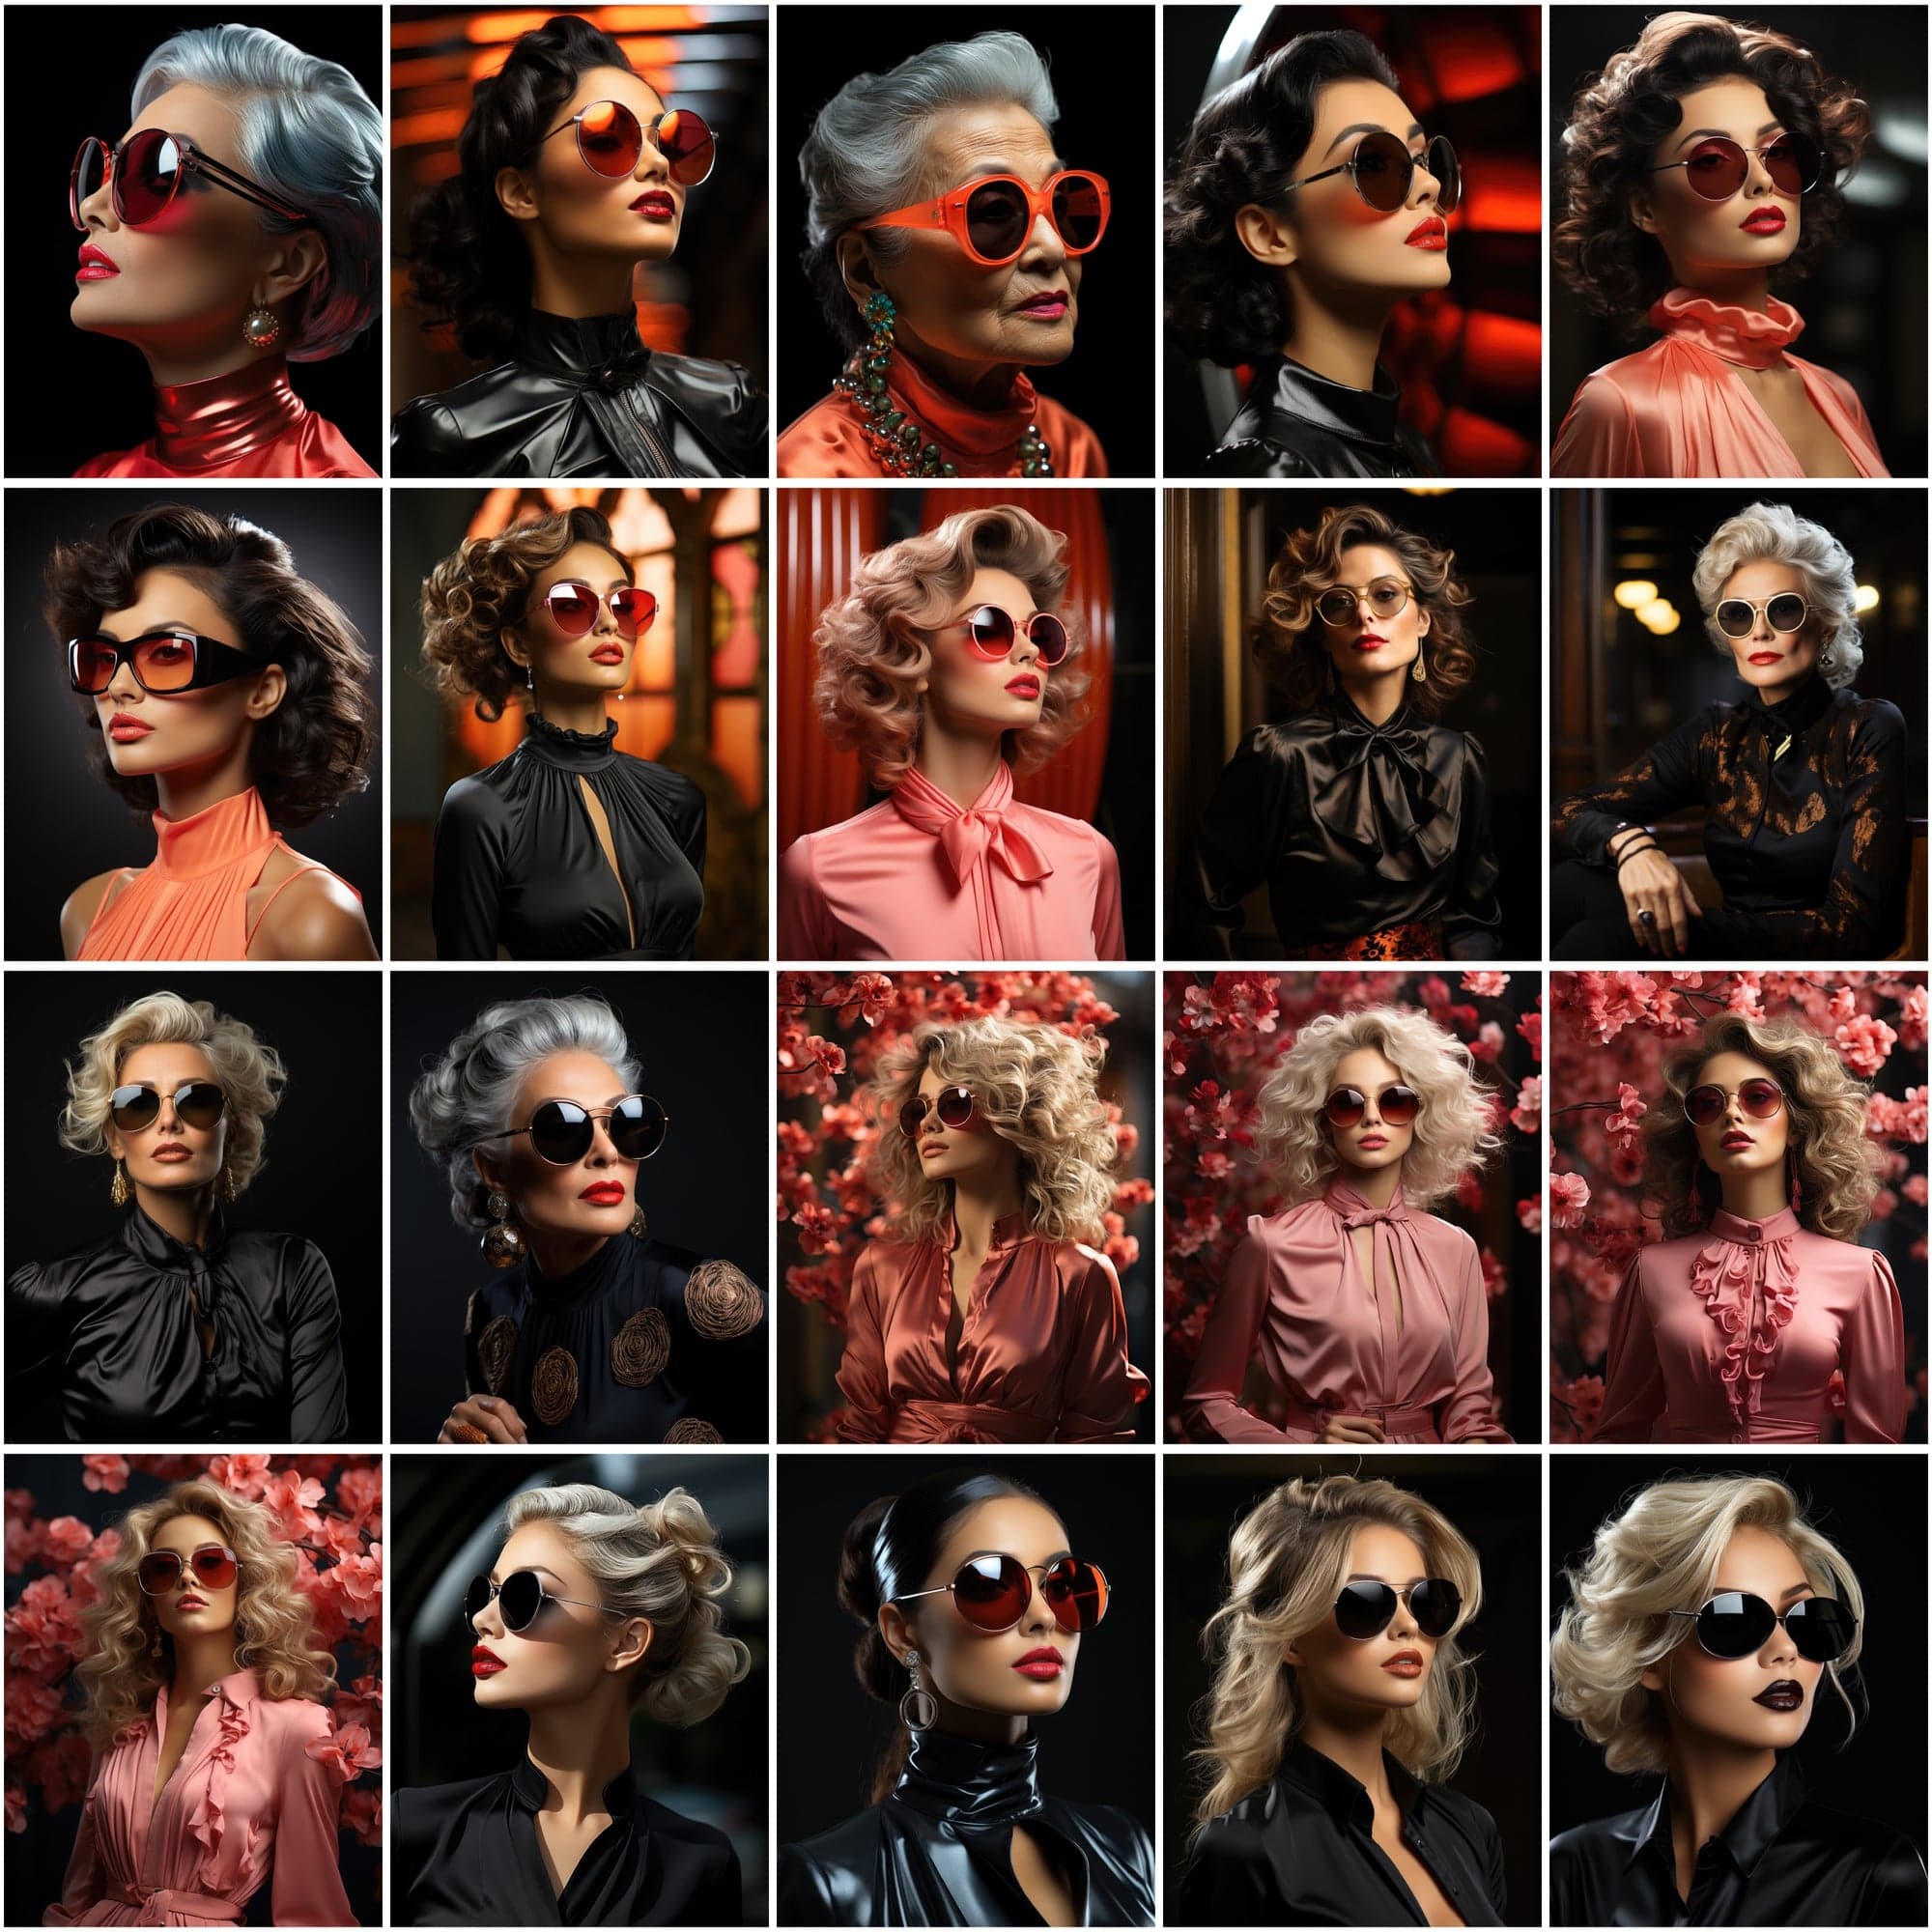 200 High-Resolution PNG Images of Fashionable Women in Trendy Outfits and Sunglasses - Commercial License Included Digital Download Sumobundle